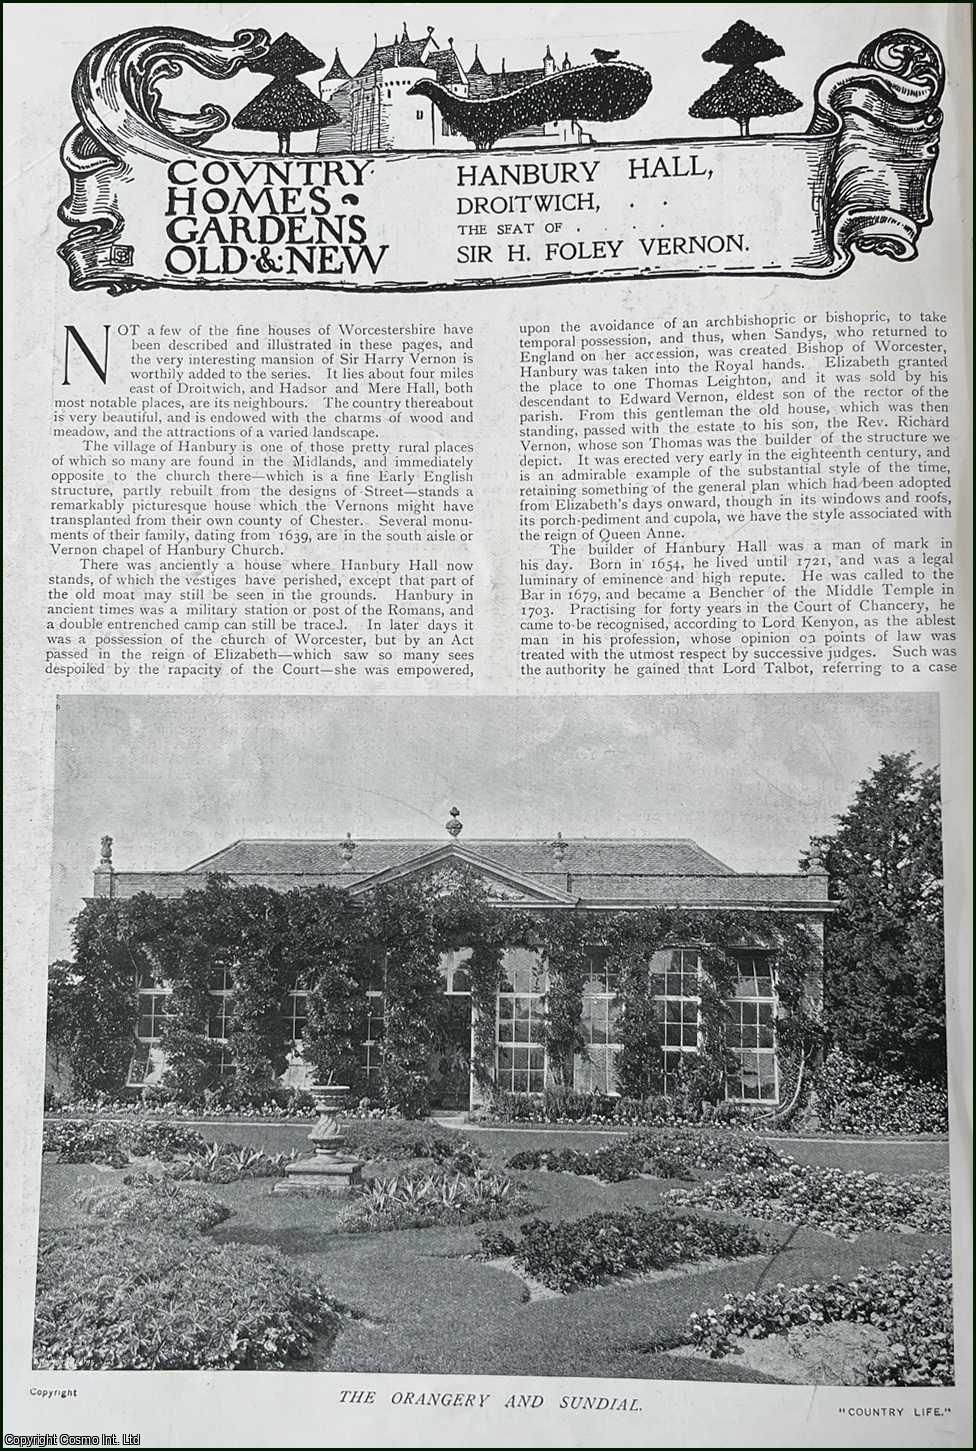 Country Life Magazine - Hanbury Hall, Droitwich. Several pictures and accompanying text, removed from an original issue of Country Life Magazine, 1901.